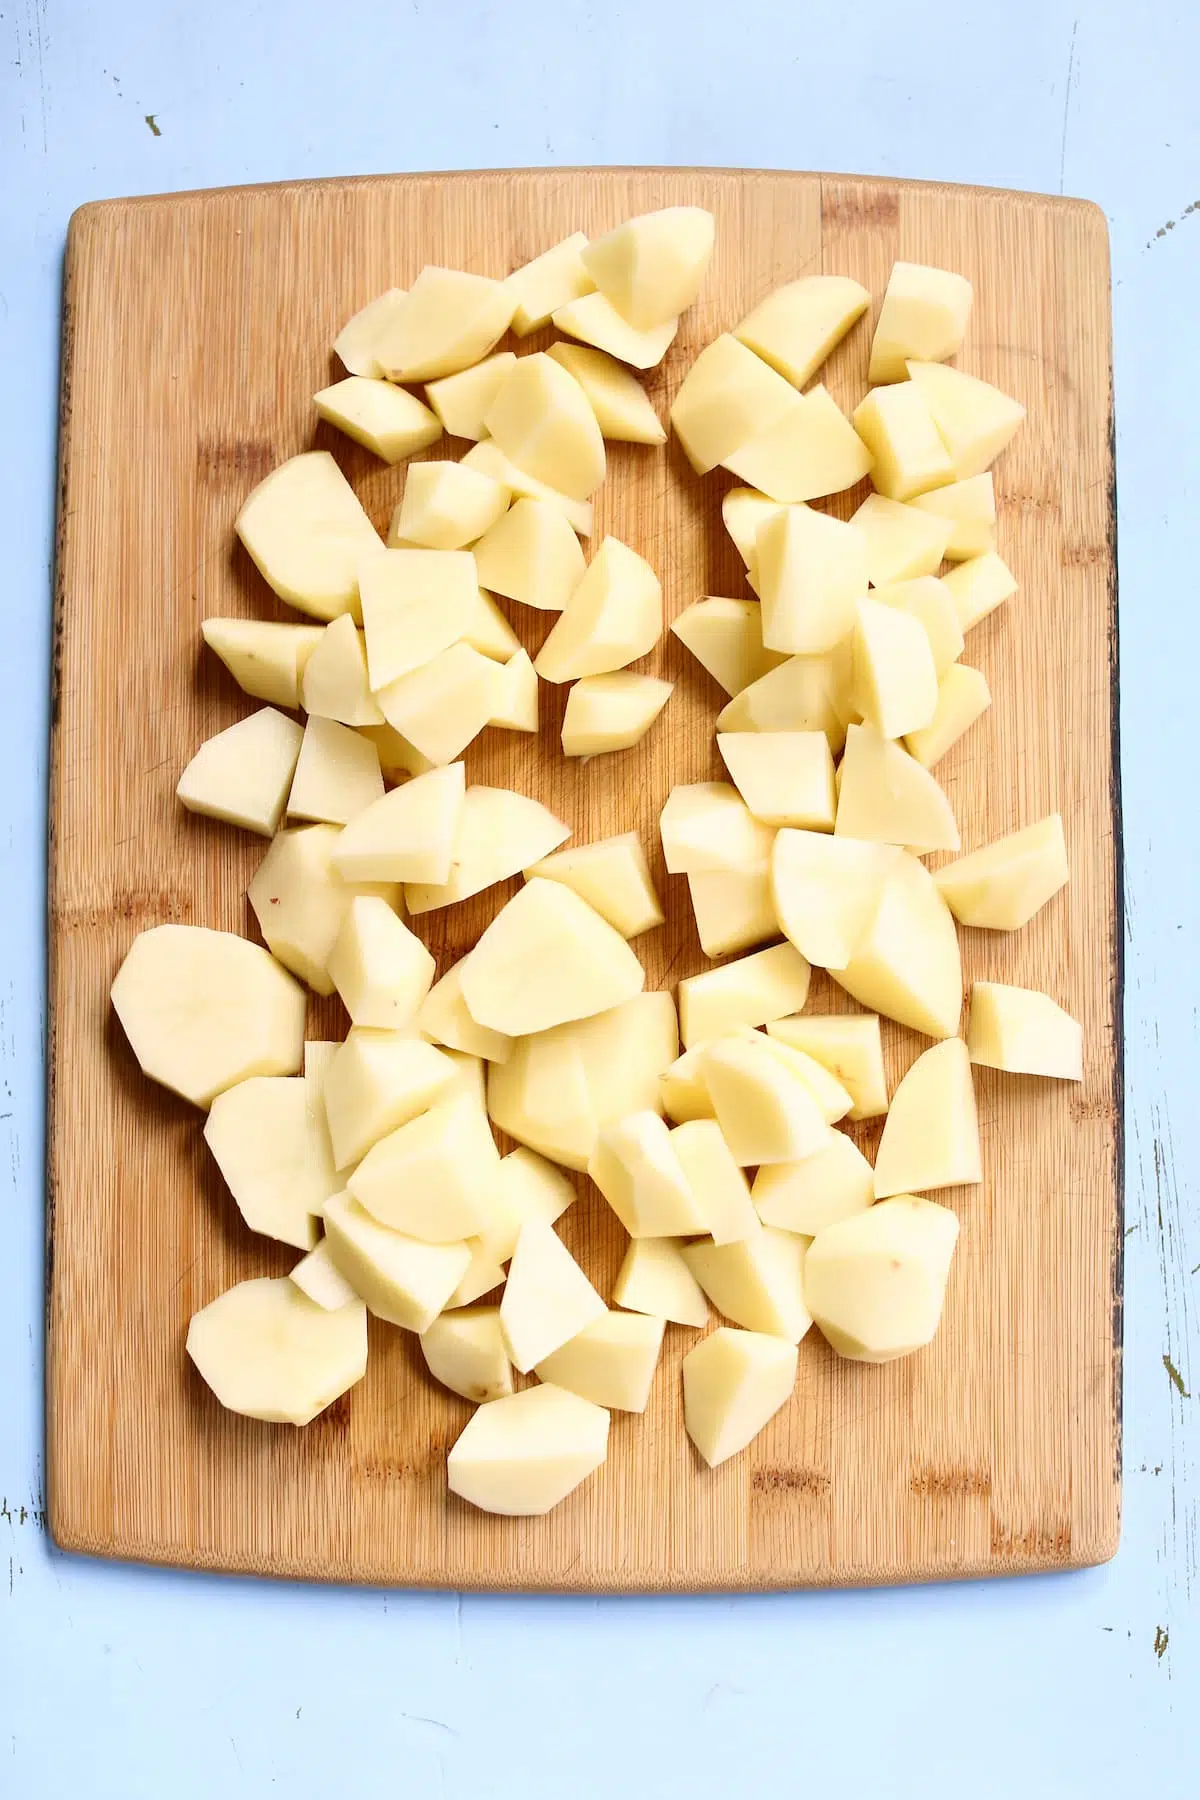 a cutting board with potatoes cut up.